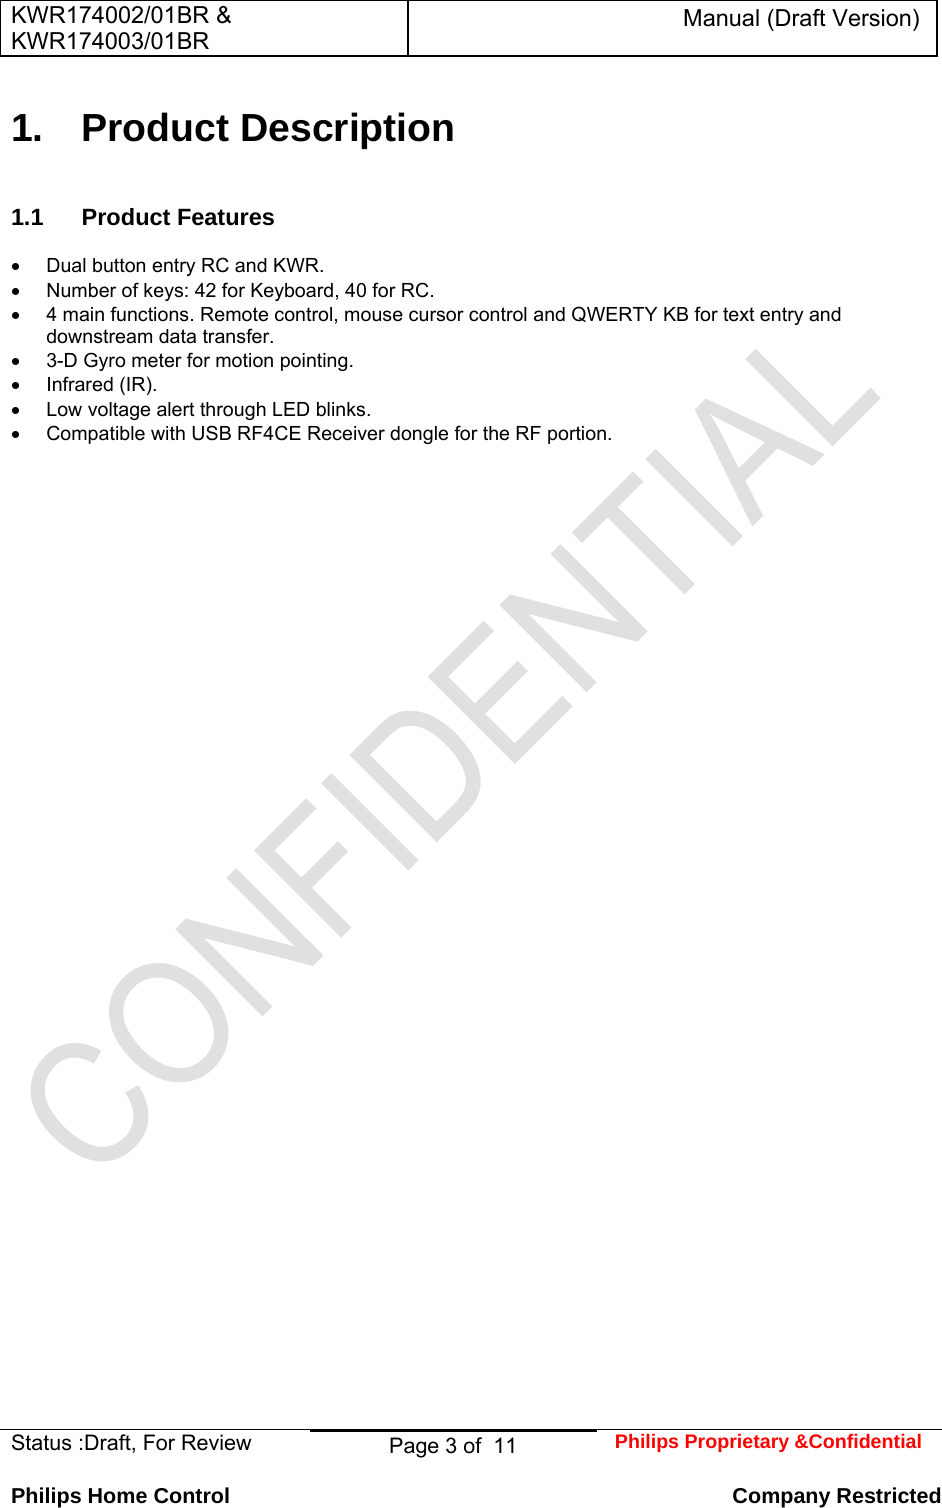 KWR174002/01BR &amp; KWR174003/01BR Manual (Draft Version)  Status :Draft, For Review  Page 3 of  11  Philips Proprietary &amp;Confidential  Philips Home Control   Company Restricted 1. Product Description 1.1 Product Features    Dual button entry RC and KWR.   Number of keys: 42 for Keyboard, 40 for RC.   4 main functions. Remote control, mouse cursor control and QWERTY KB for text entry and downstream data transfer.   3-D Gyro meter for motion pointing.  Infrared (IR).   Low voltage alert through LED blinks.   Compatible with USB RF4CE Receiver dongle for the RF portion. 